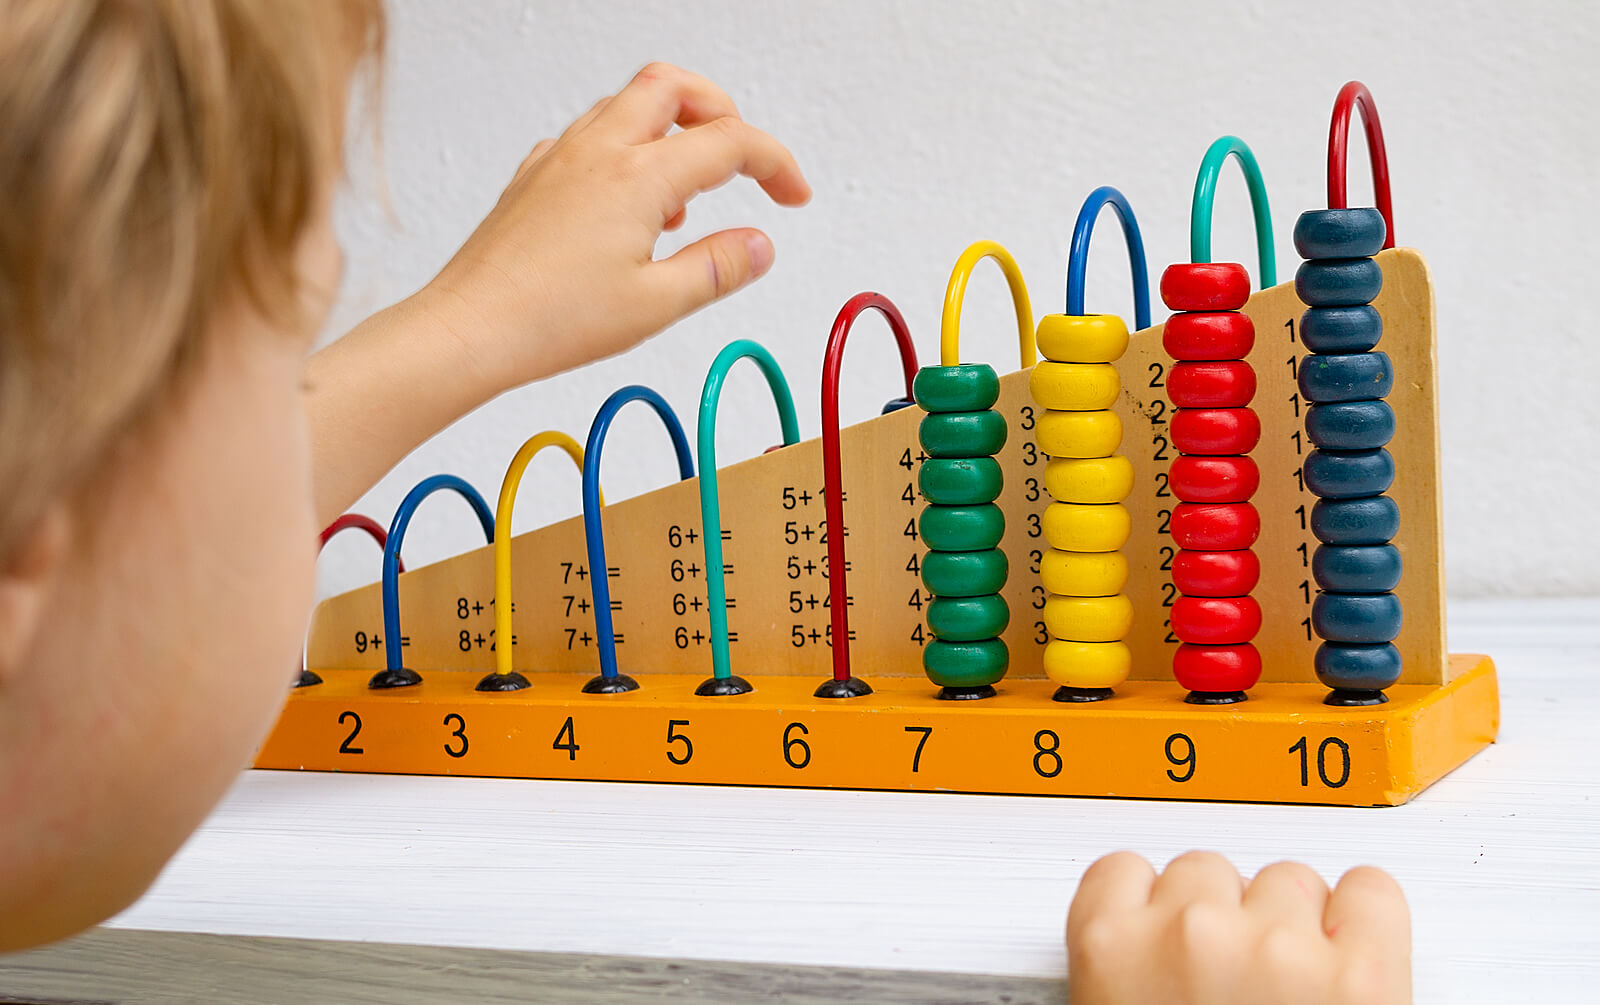 A child using an abacus to learn math.